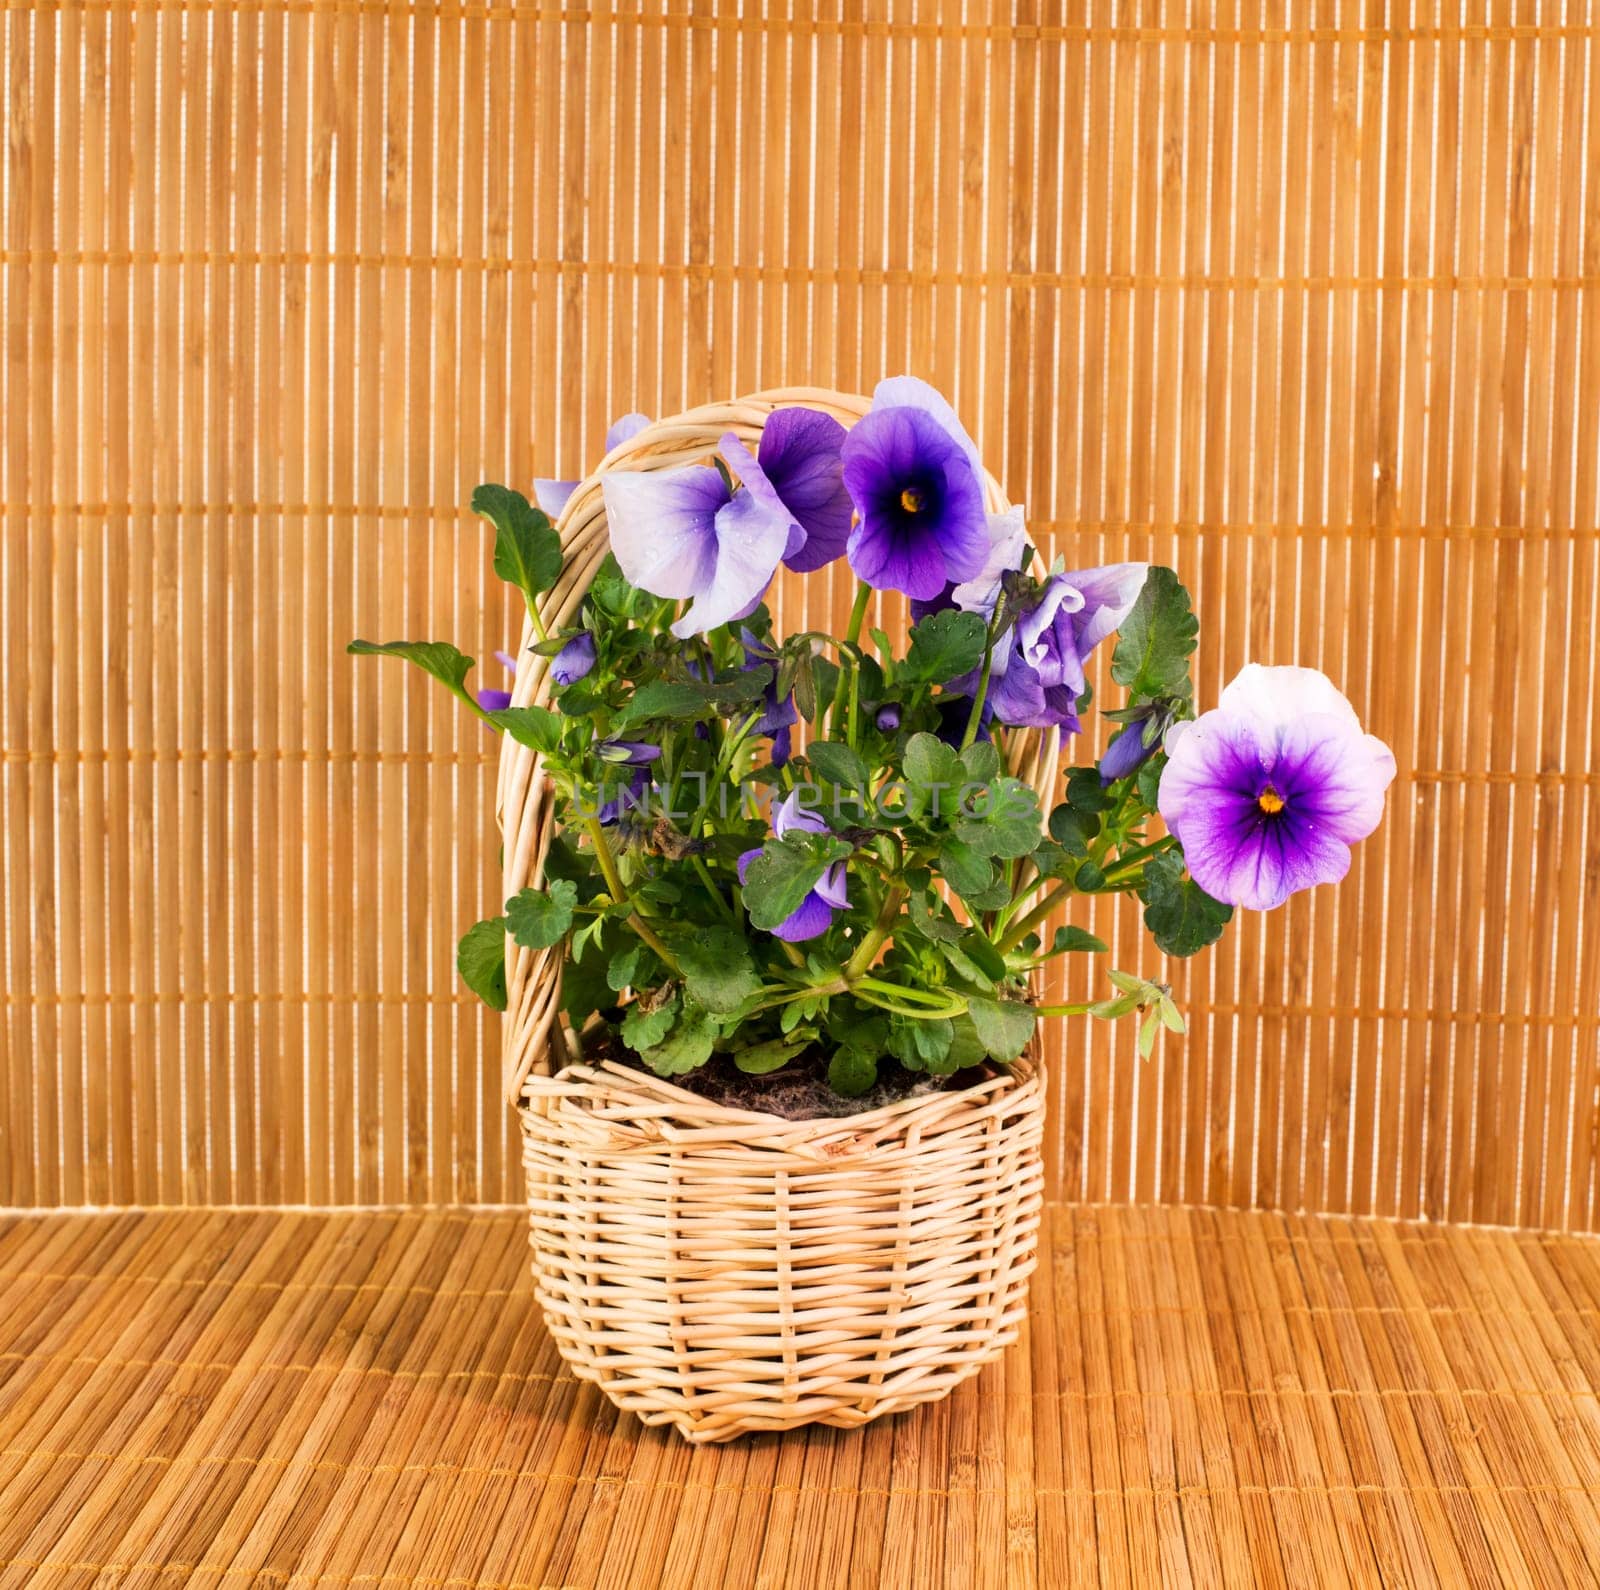 violets on bamboo background by compuinfoto